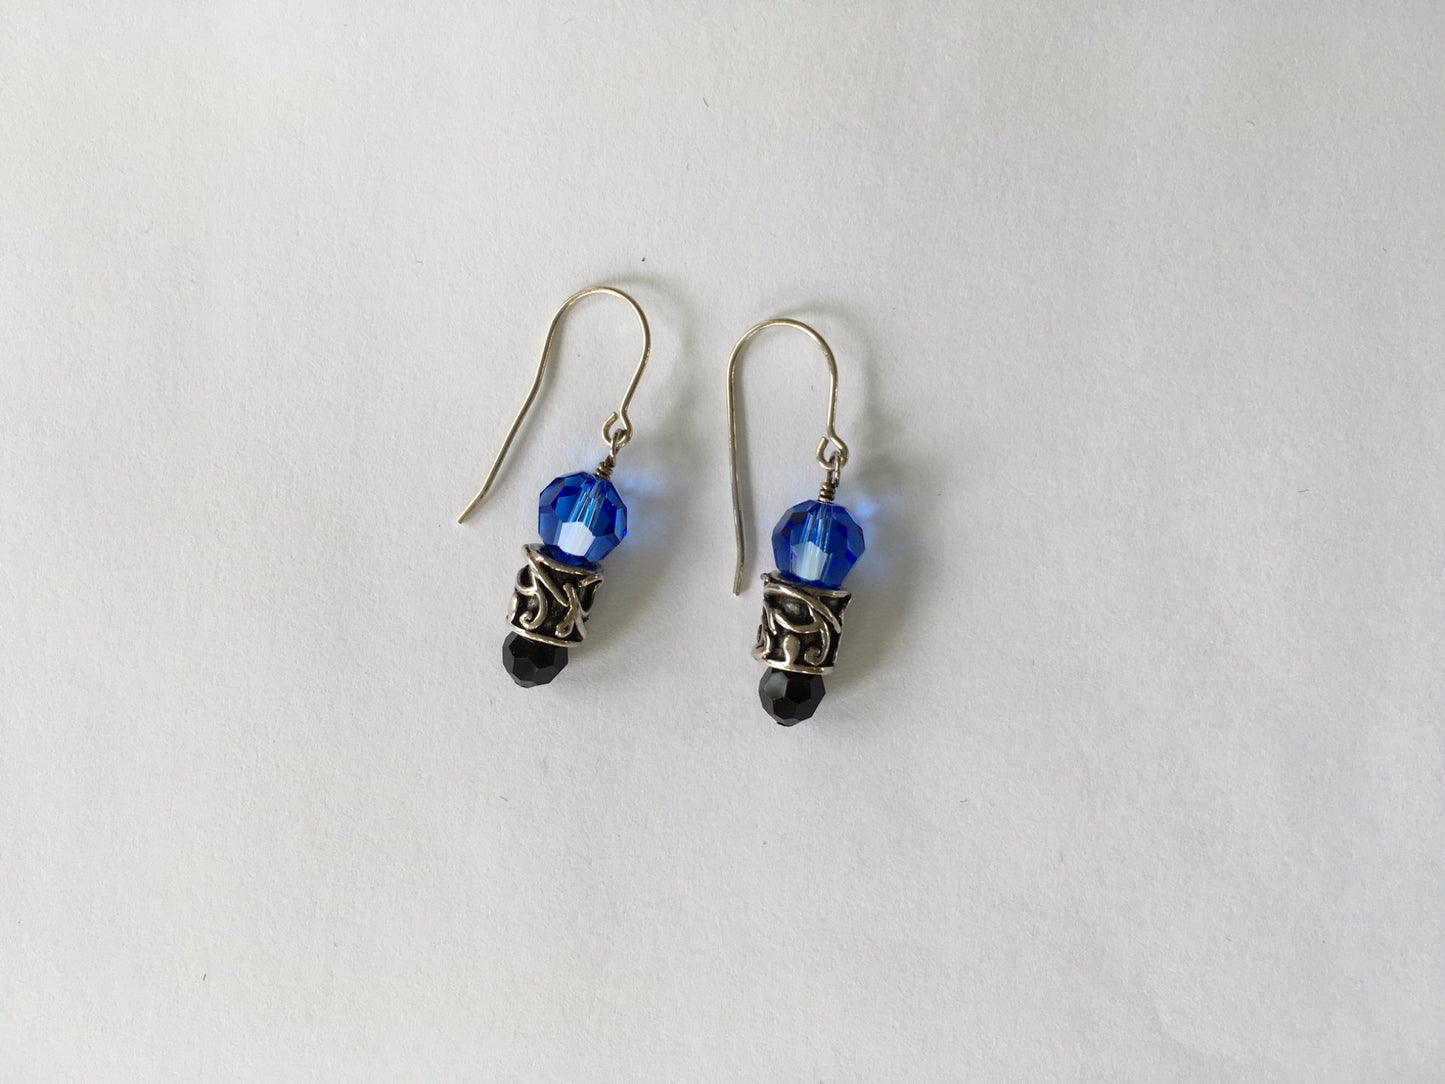 Blue and Black Swarovski Crystals with Sterling Silver Dangle Earrings  - 2